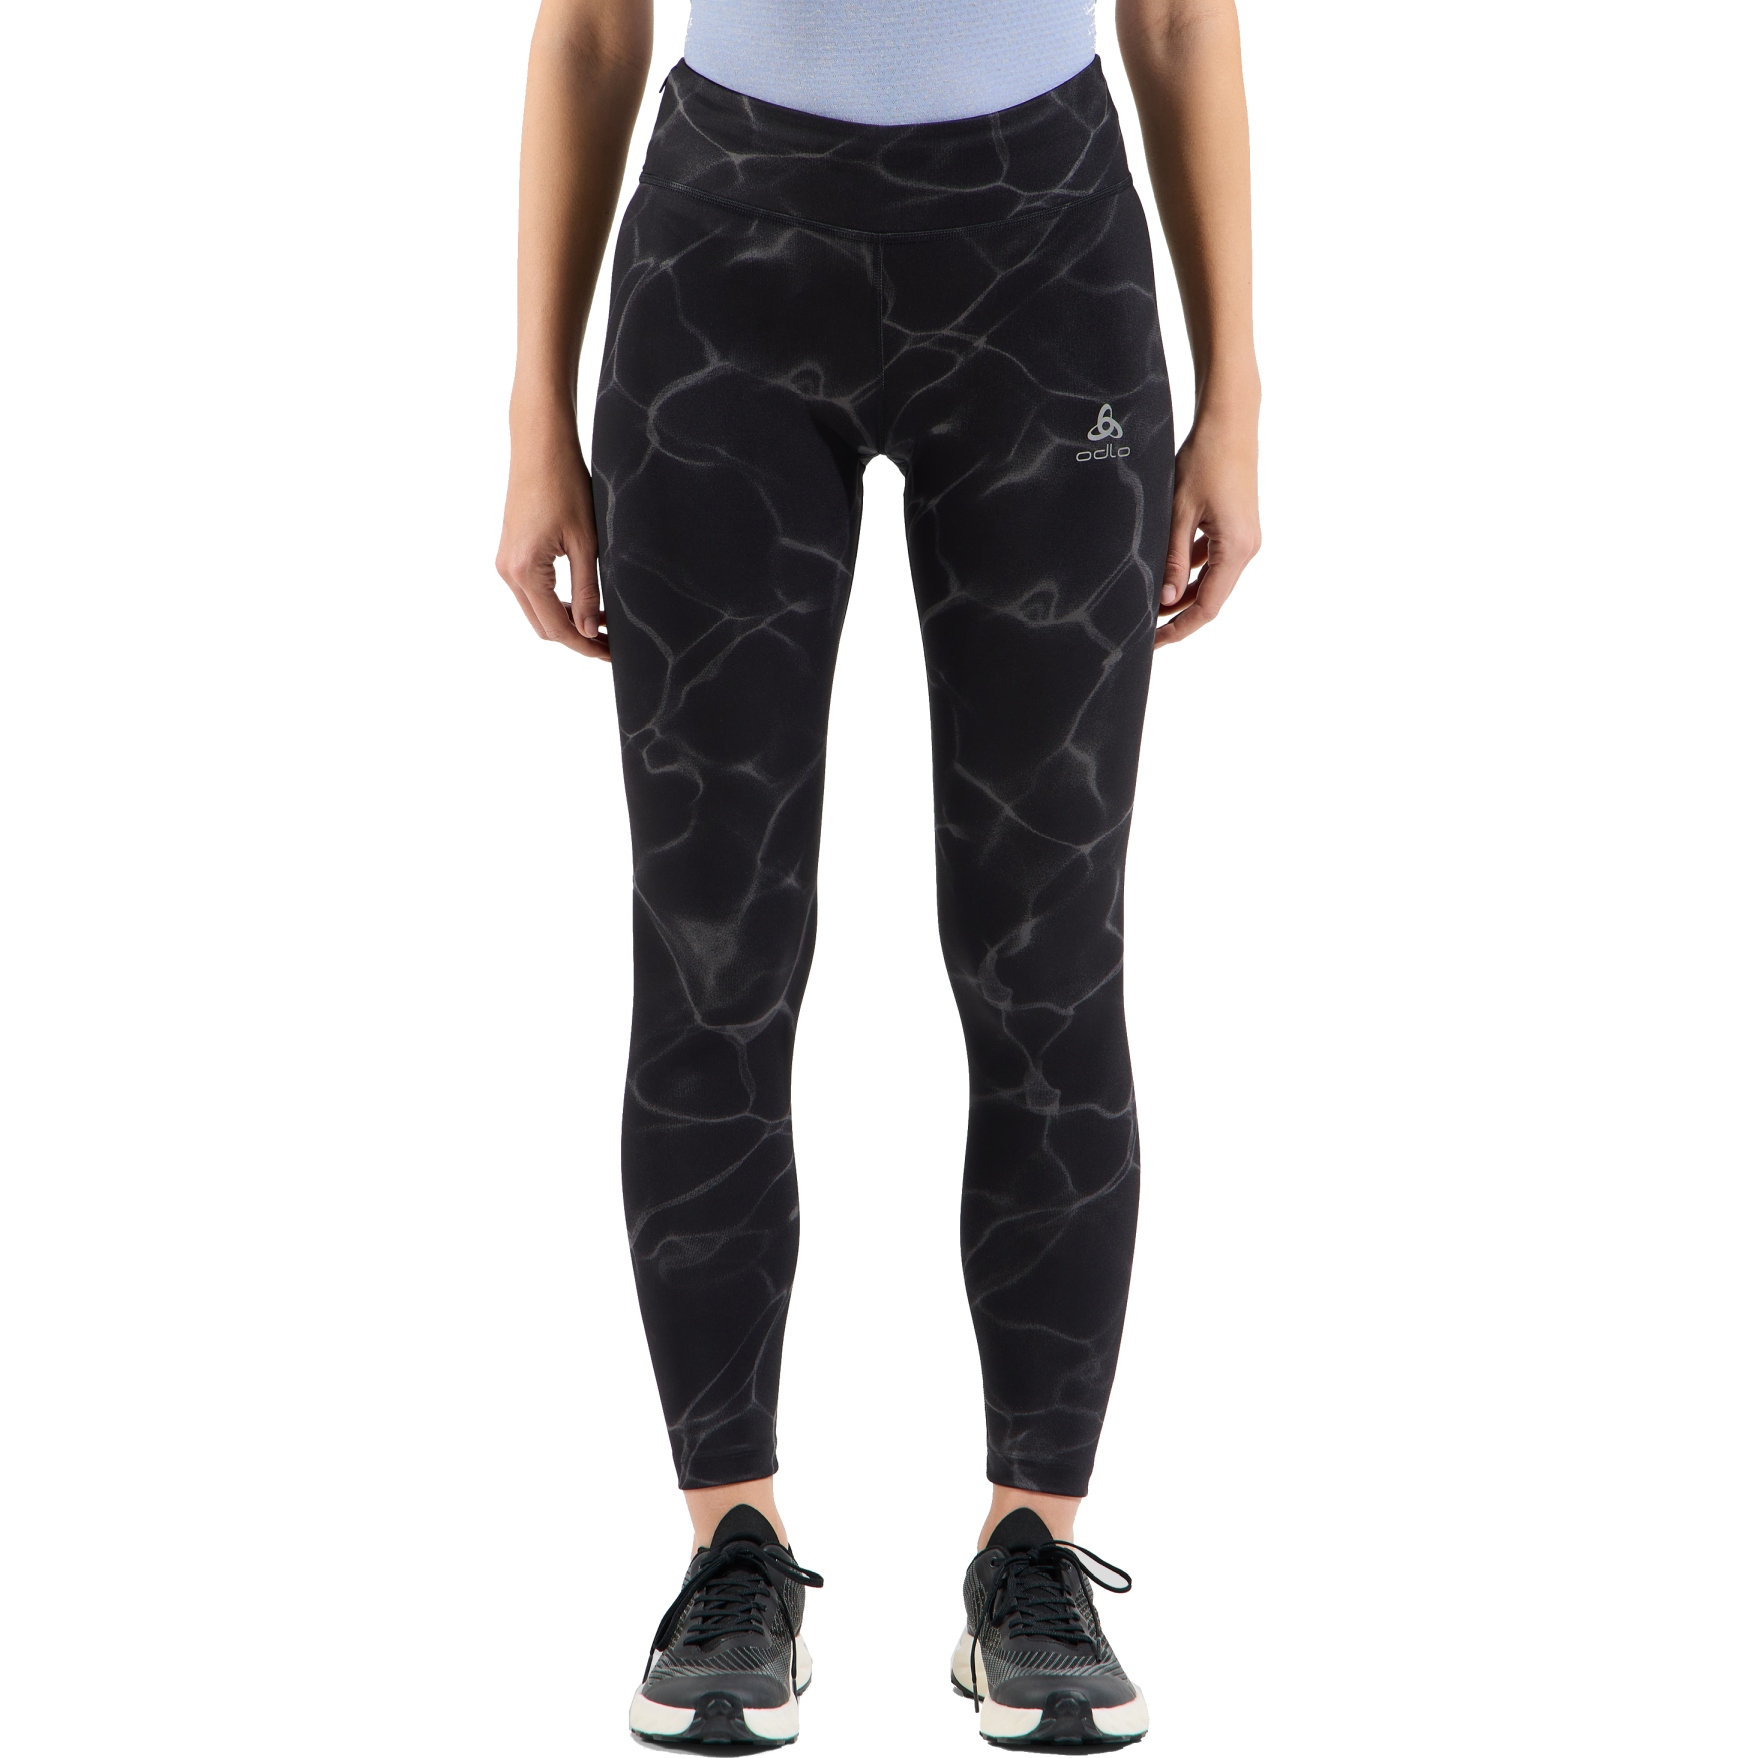 Picture of Odlo Zeroweight Print Running Tights Women - black